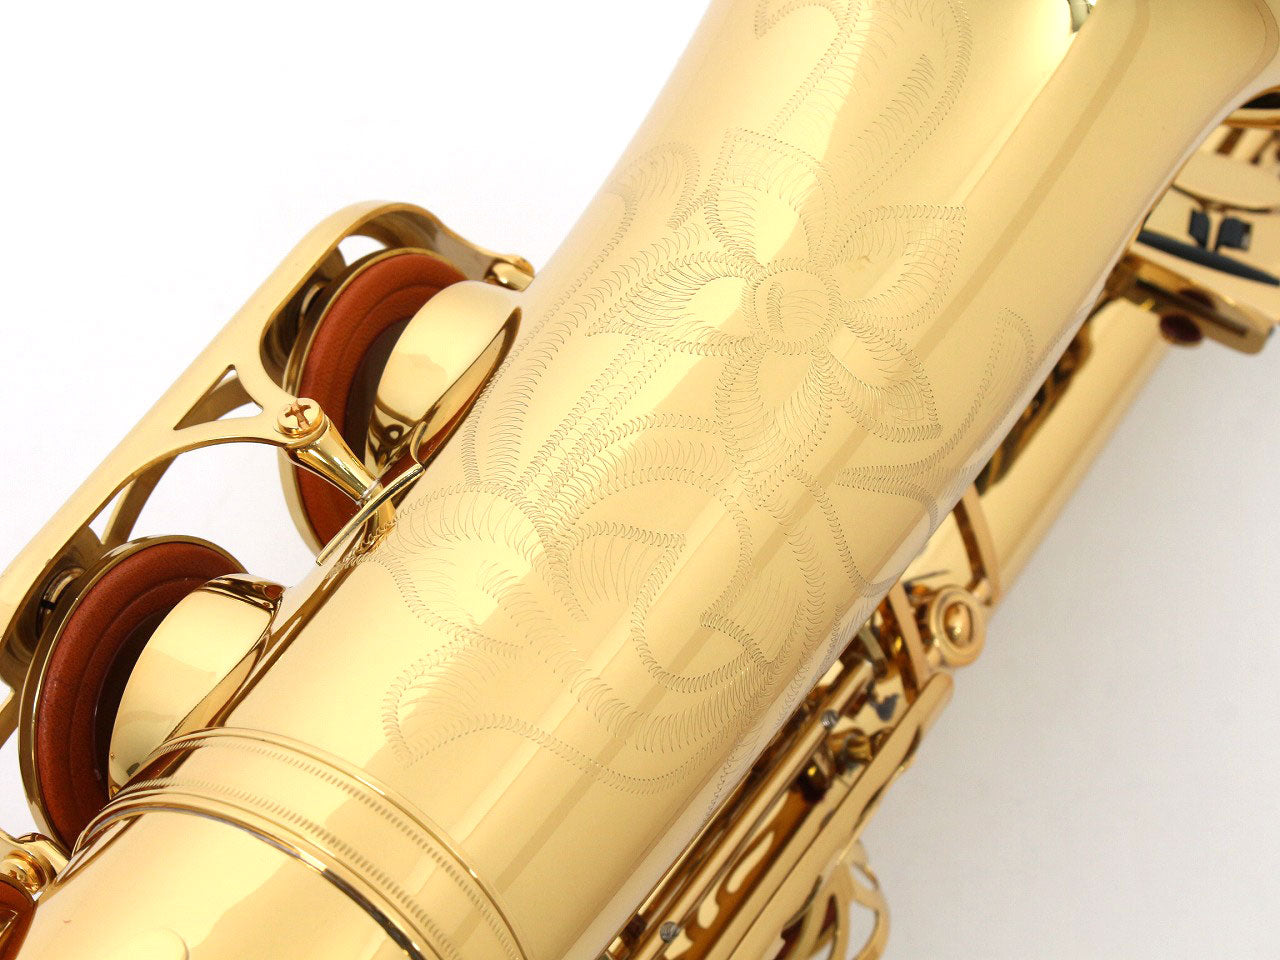 [SN 309760] USED YAMAHA / Alto saxophone YAS-62 G1 neck, all tampos replaced [20]